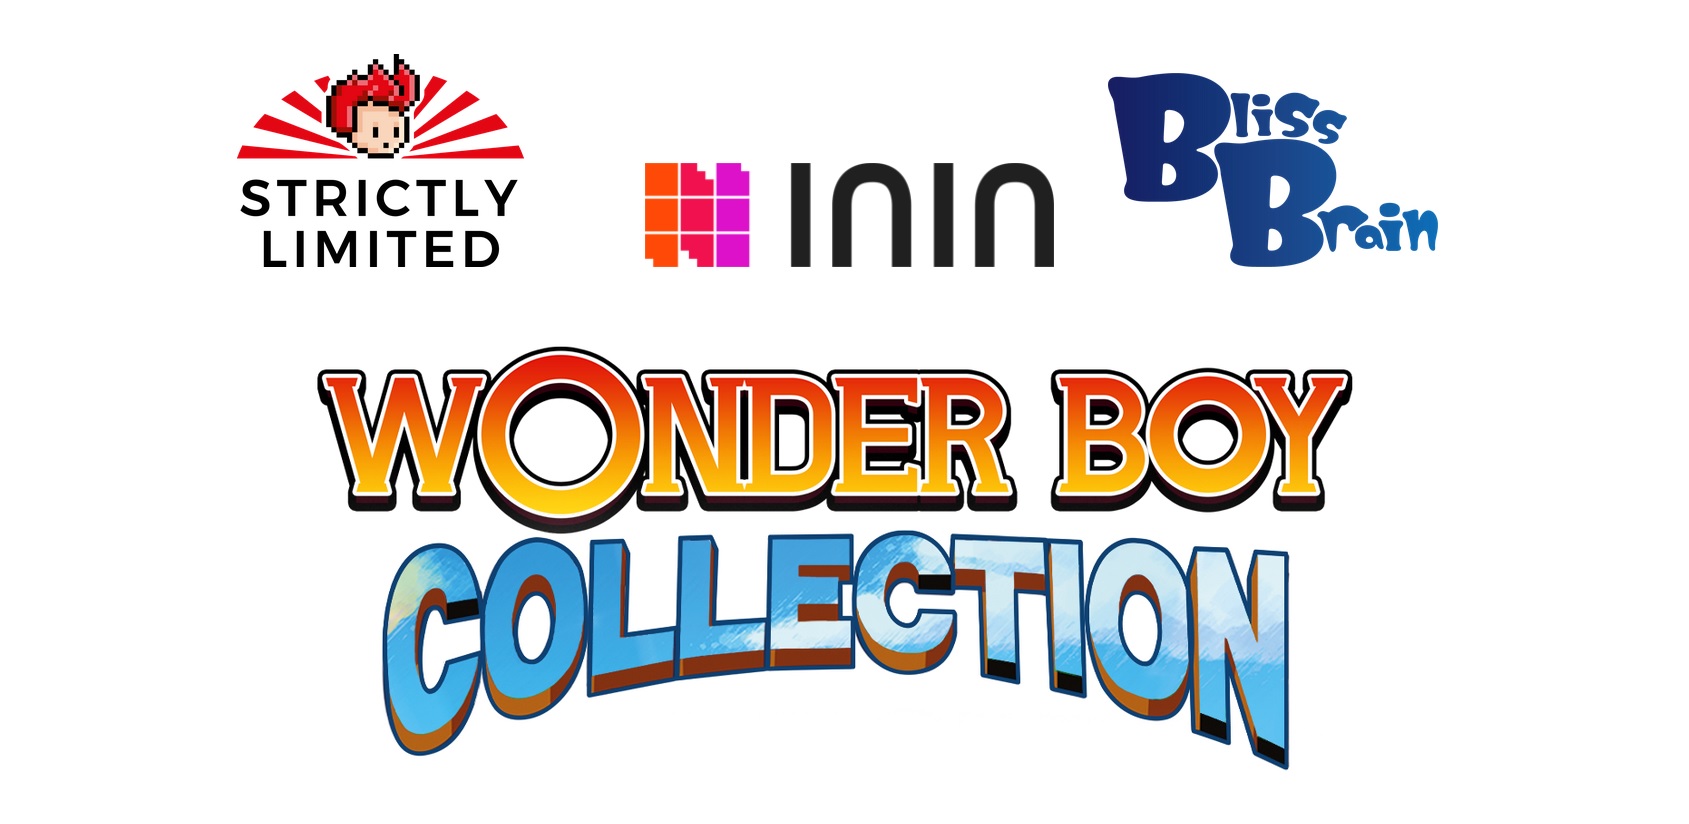 Wonder Boy Collection arriva per Switch e PS4